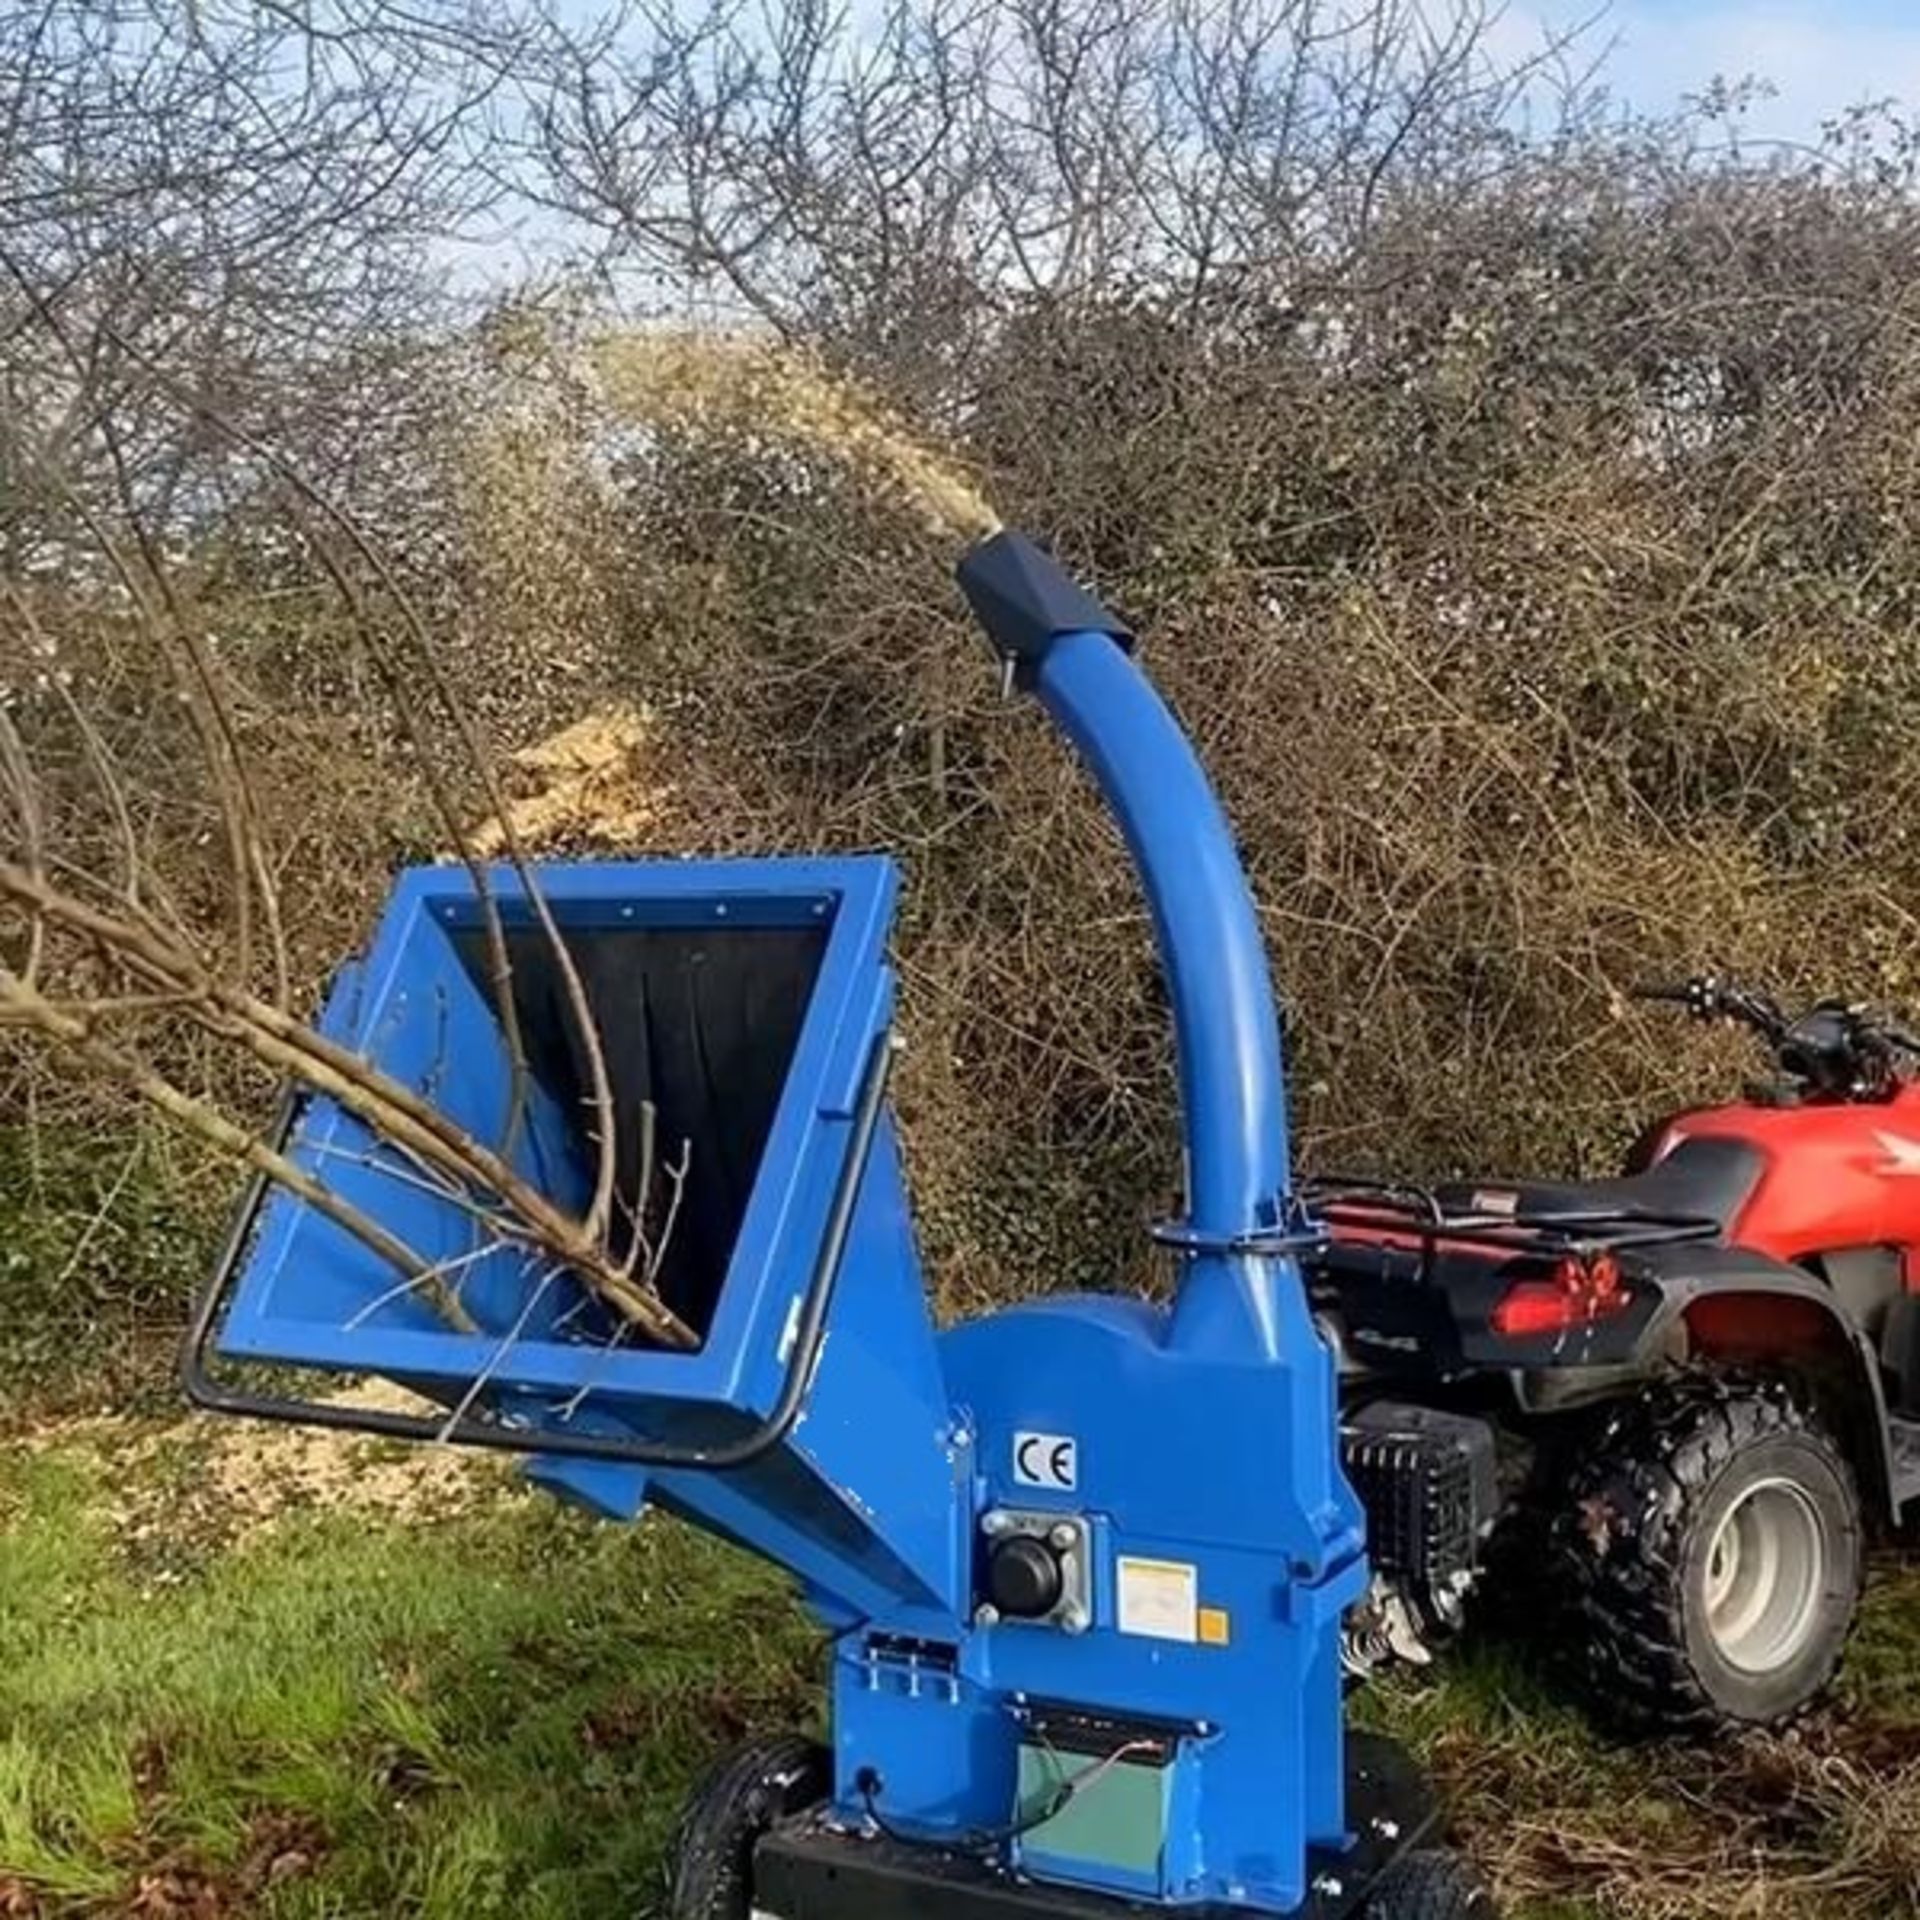 NEW AND UNUSED 15100TE 420cc 4.5" TOWABLE PETROL WOOD CHIPPER, RRP OVER £2400 *PLUS VAT* - Image 2 of 5